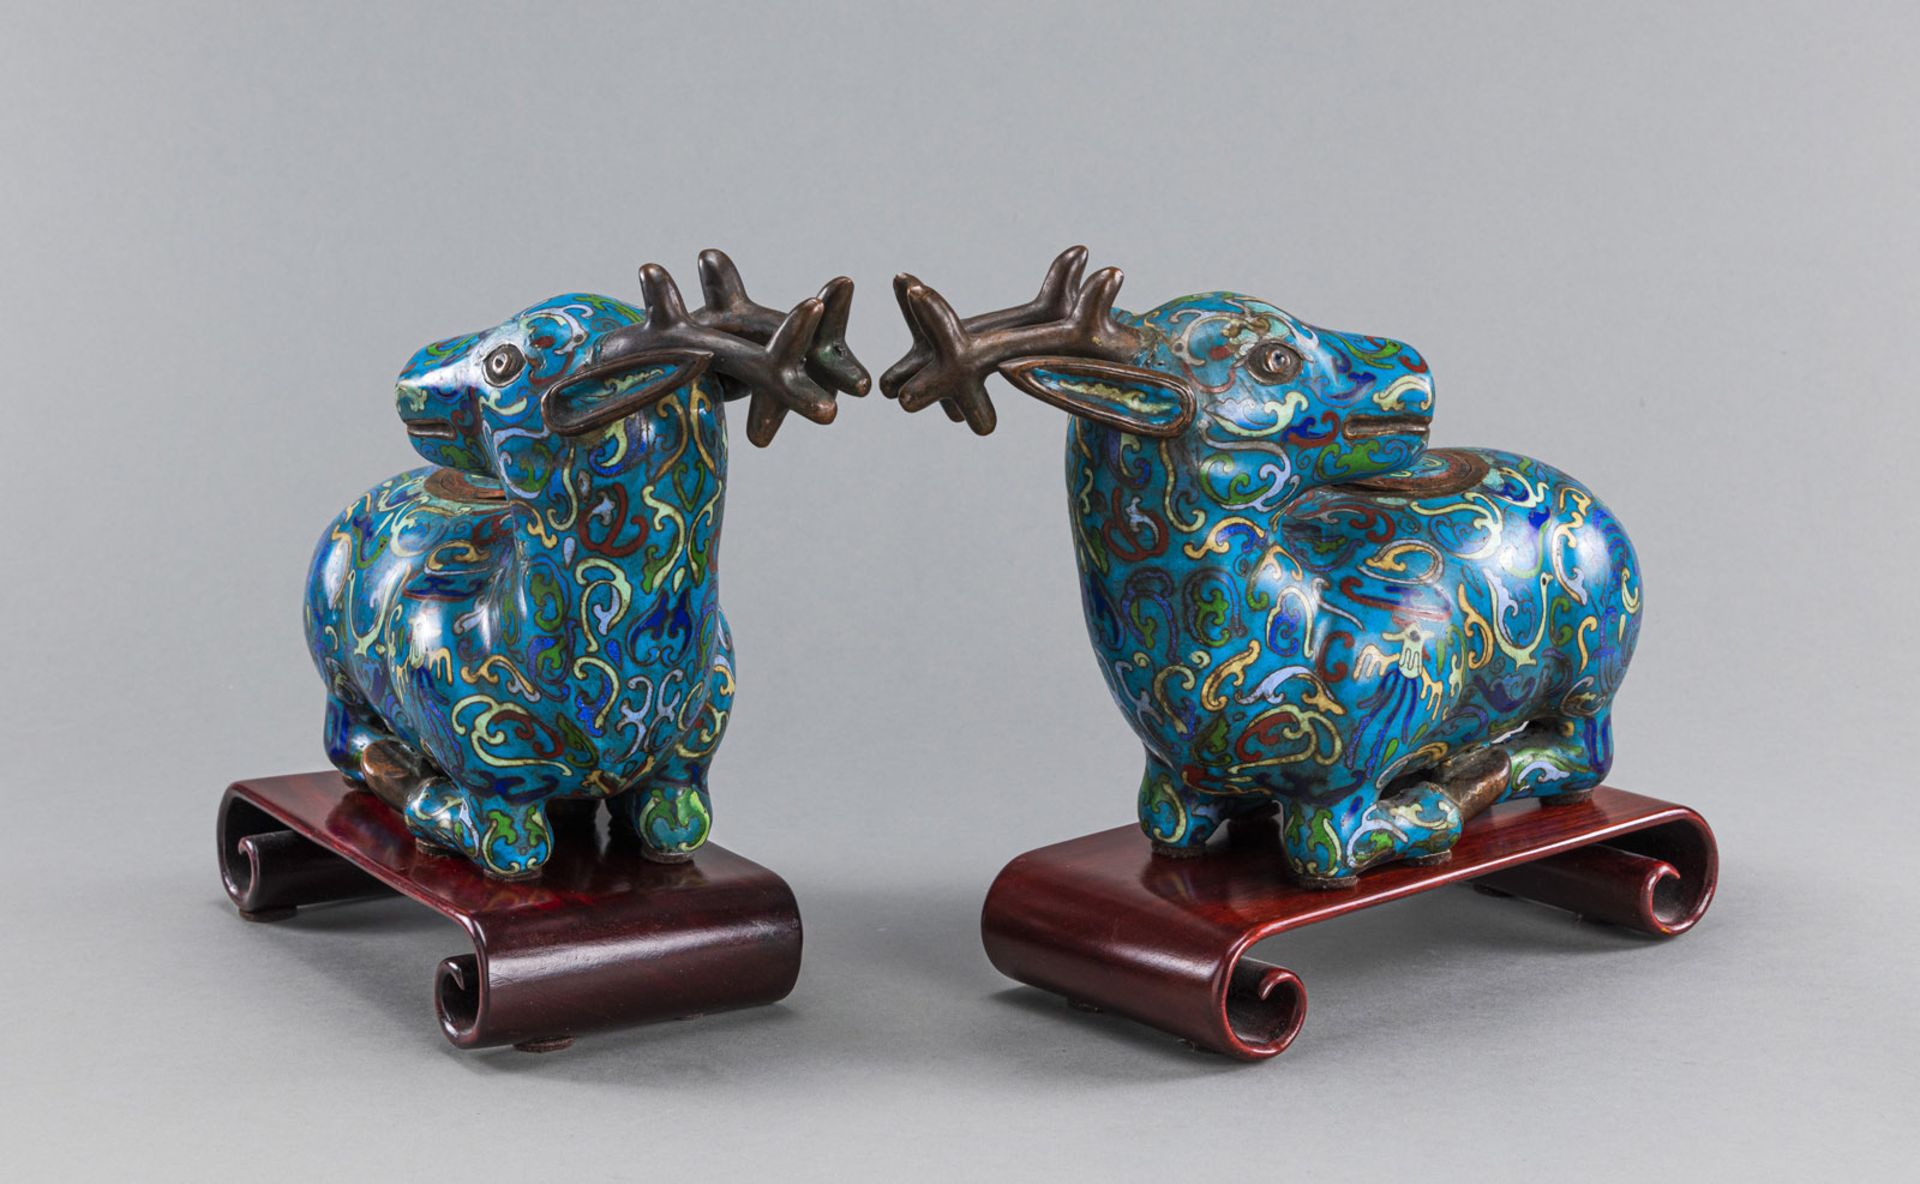 A PAIR OF CLOISONNÉ LIDDED VESSELS IN THE SHAPE OF LYING DEER ON A SEPARATE WOODEN BASE - Image 2 of 2